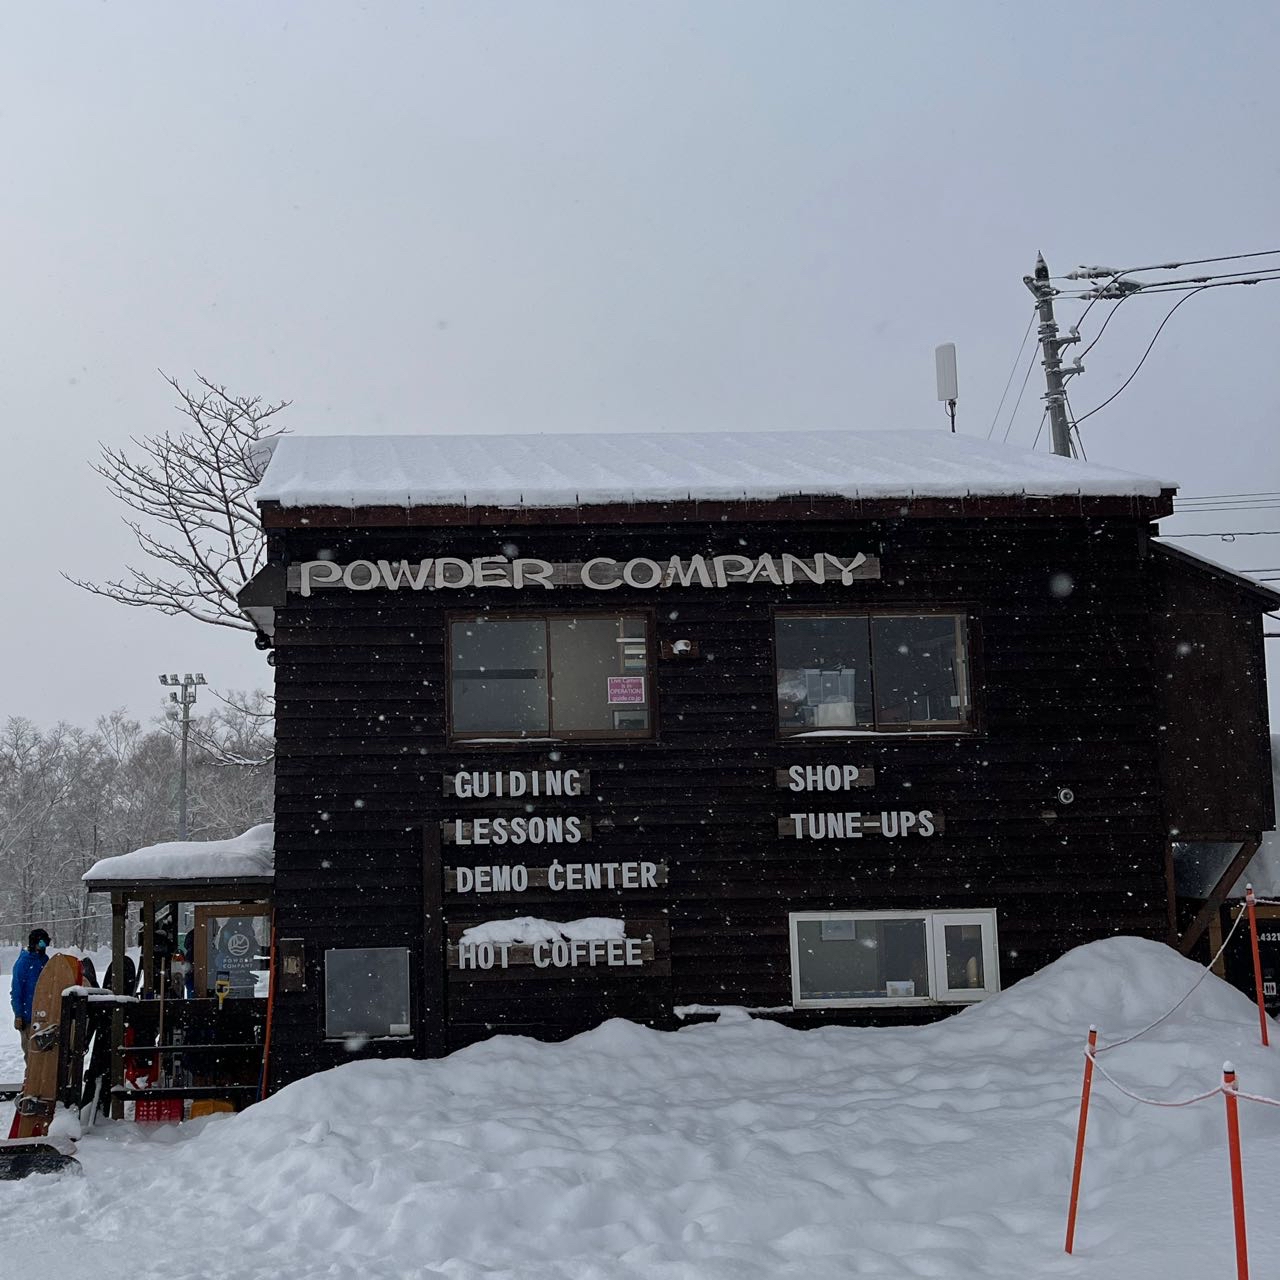 Powder Company located at the base of Annupuri res…